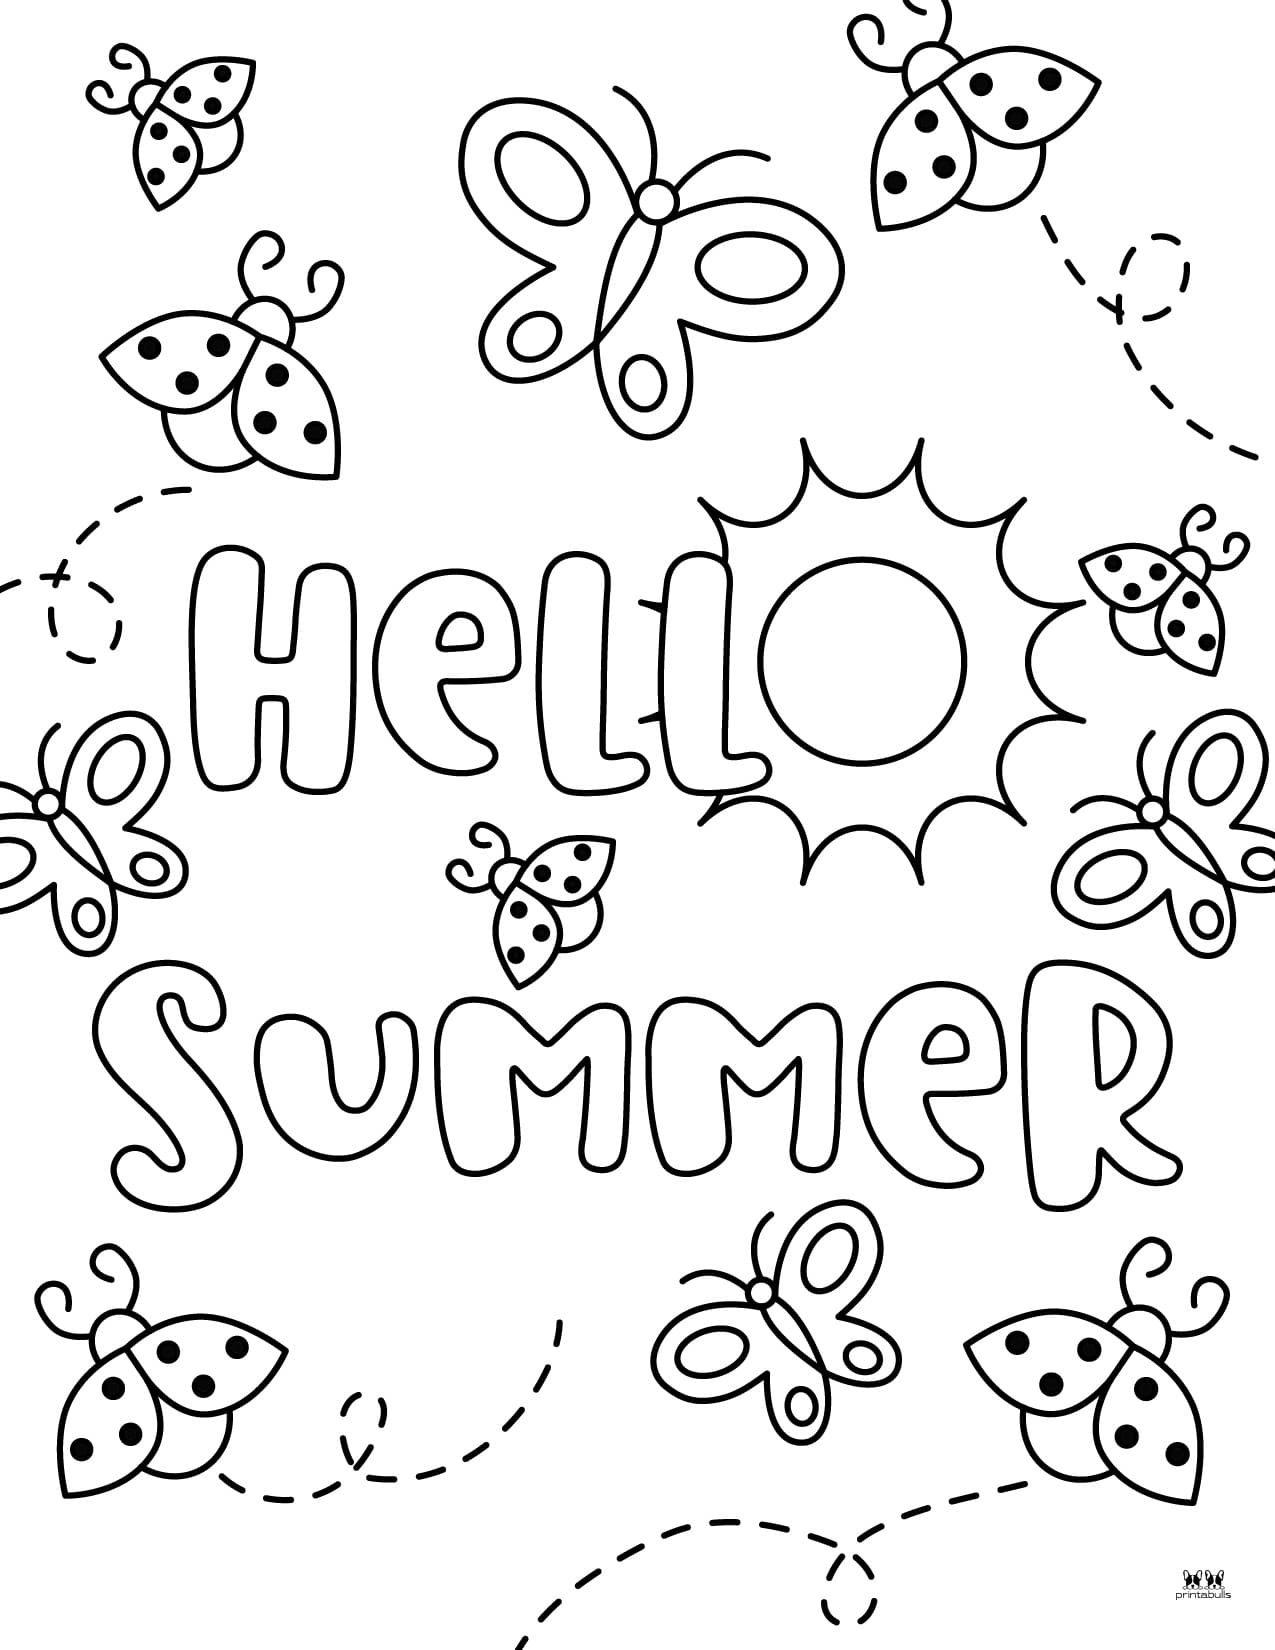 Summer Coloring Pages - 100 FREE Printable Pages | Printabulls